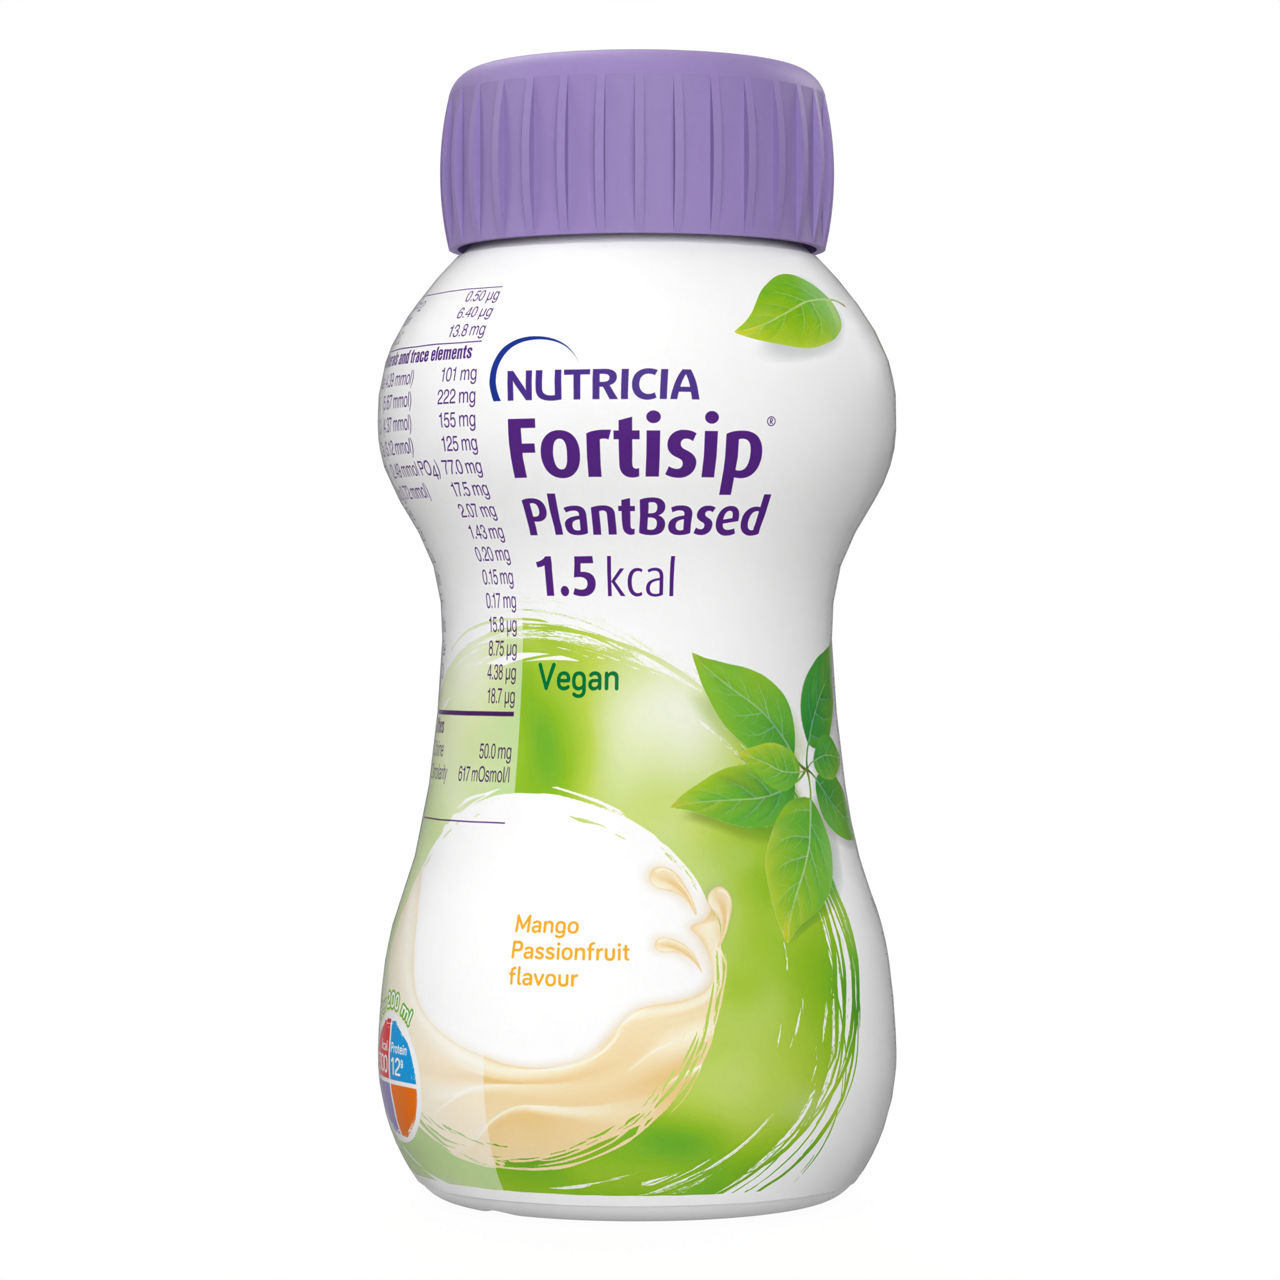 Fortisip PlantBased 1.5kcal Mango Passionfruit